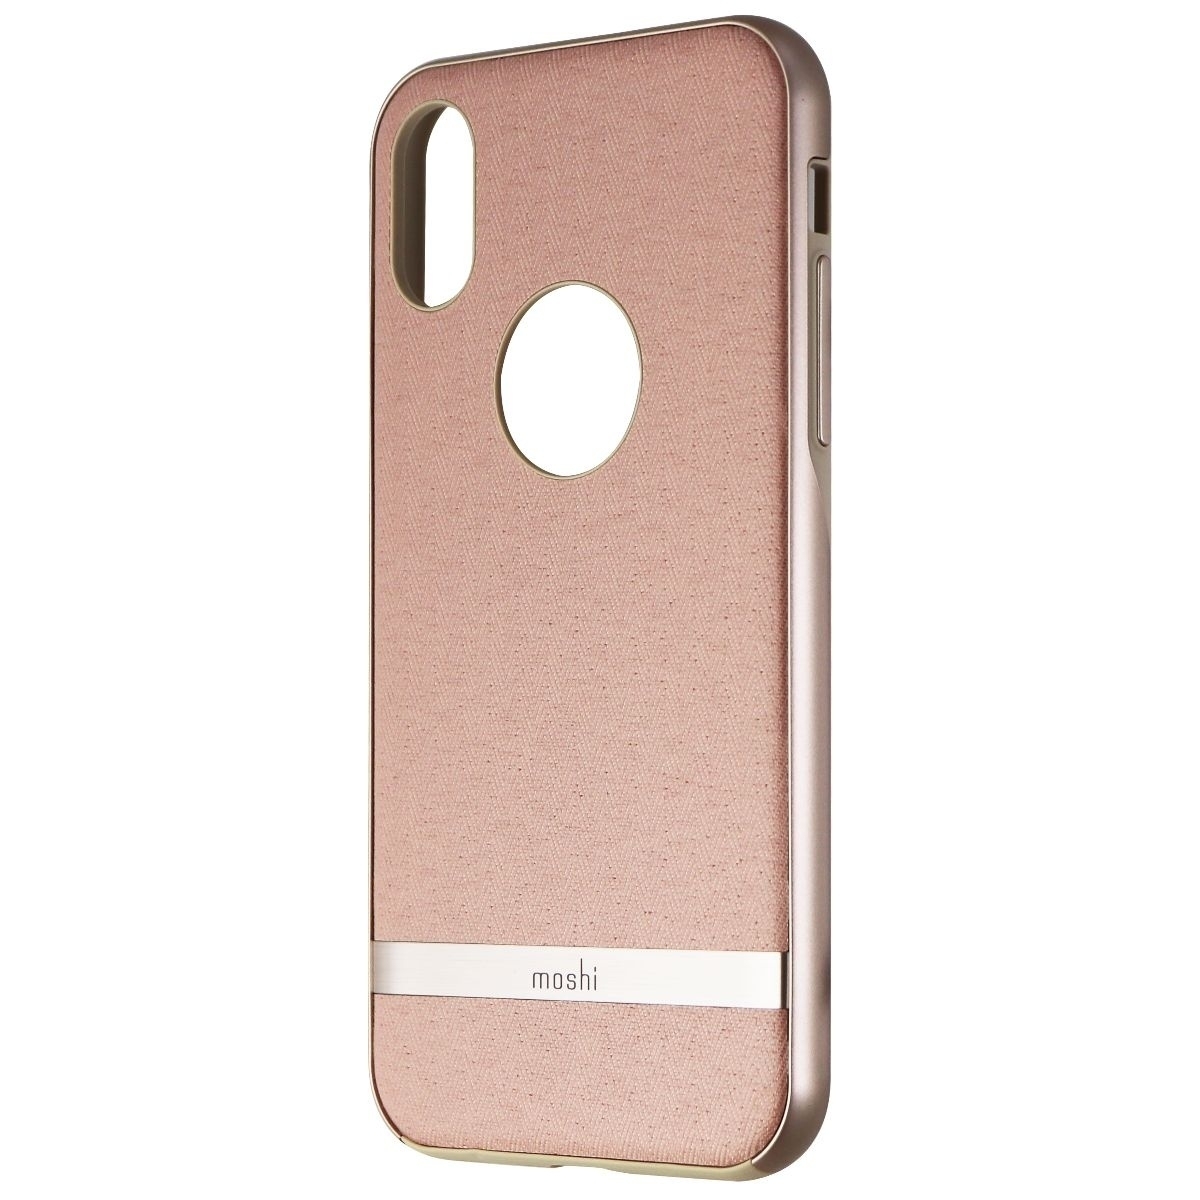 Moshi Vesta Textured Hardshell Protective Case For Apple IPhone X - Pink